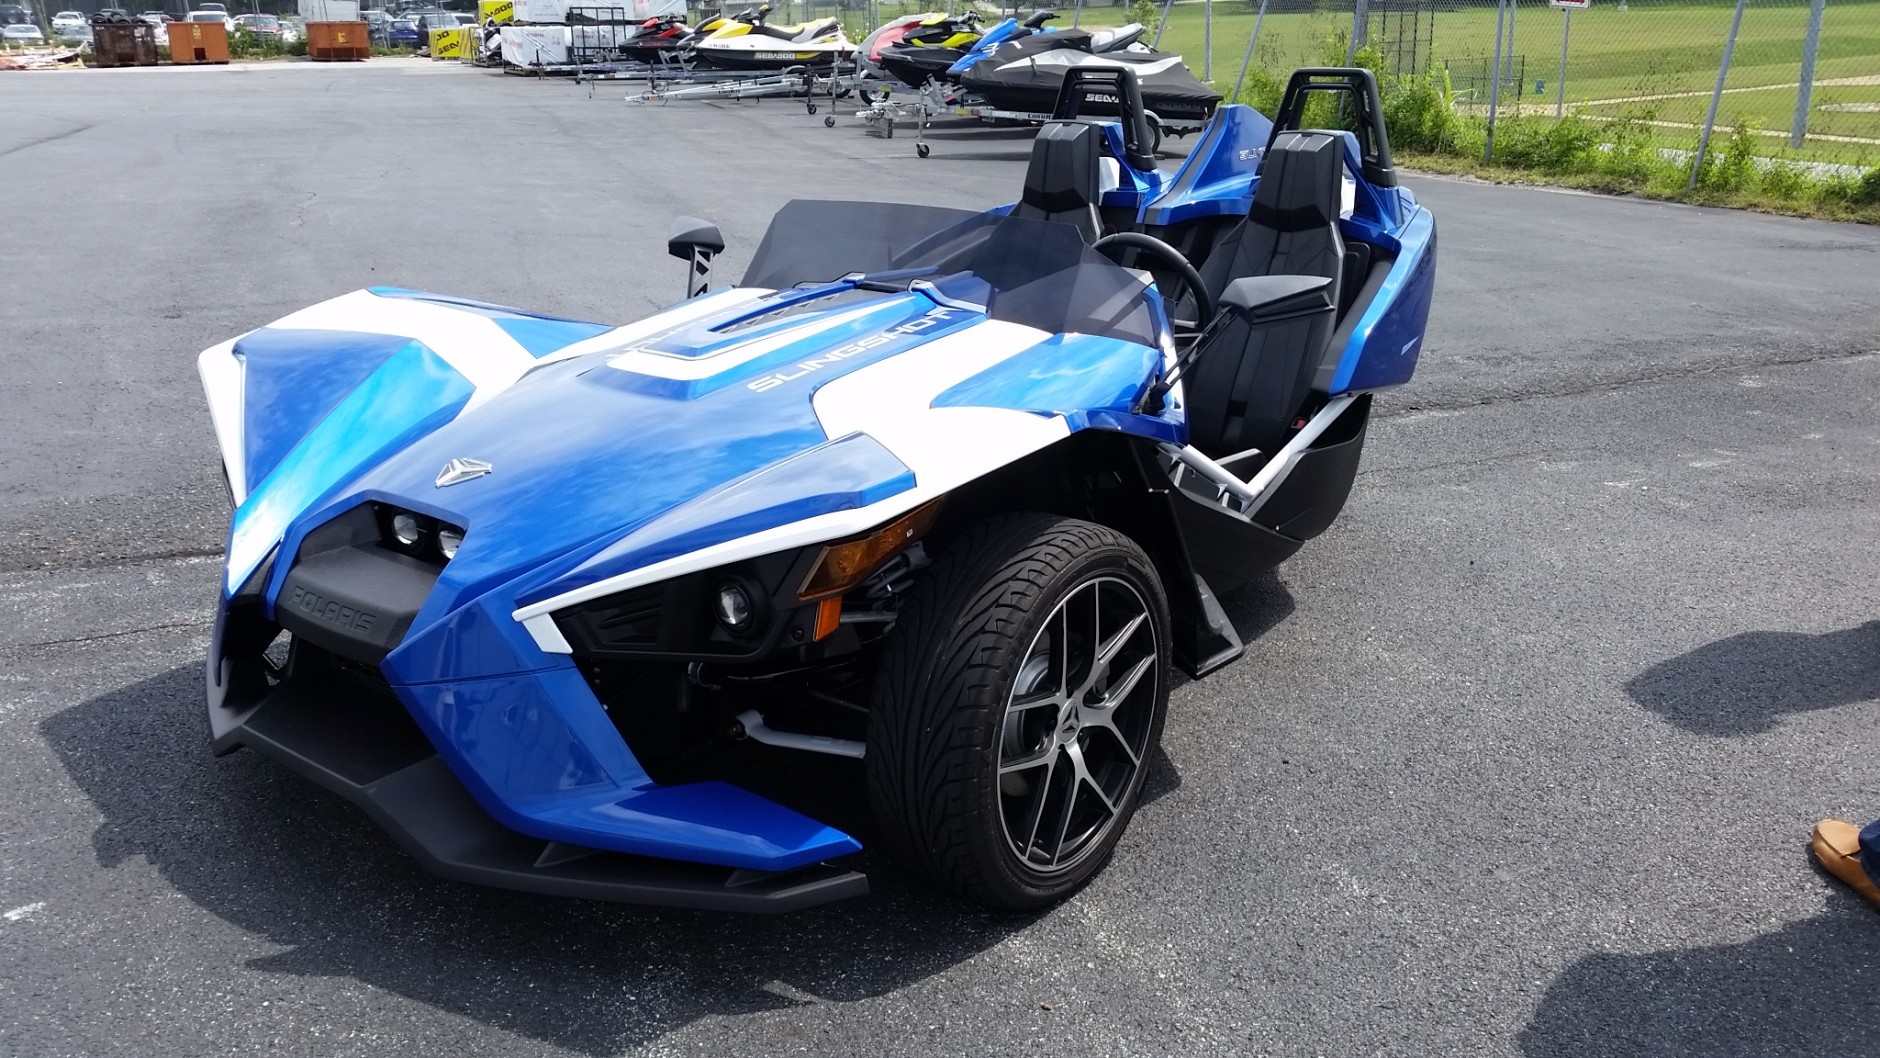 "If you enjoy driving a convertible car, but want the power and handling of a go cart - this vehicle is very exhilarating," Pete's Cycles Vice-President John Leach said.  (Courtesy Maryland Department of Transportation)